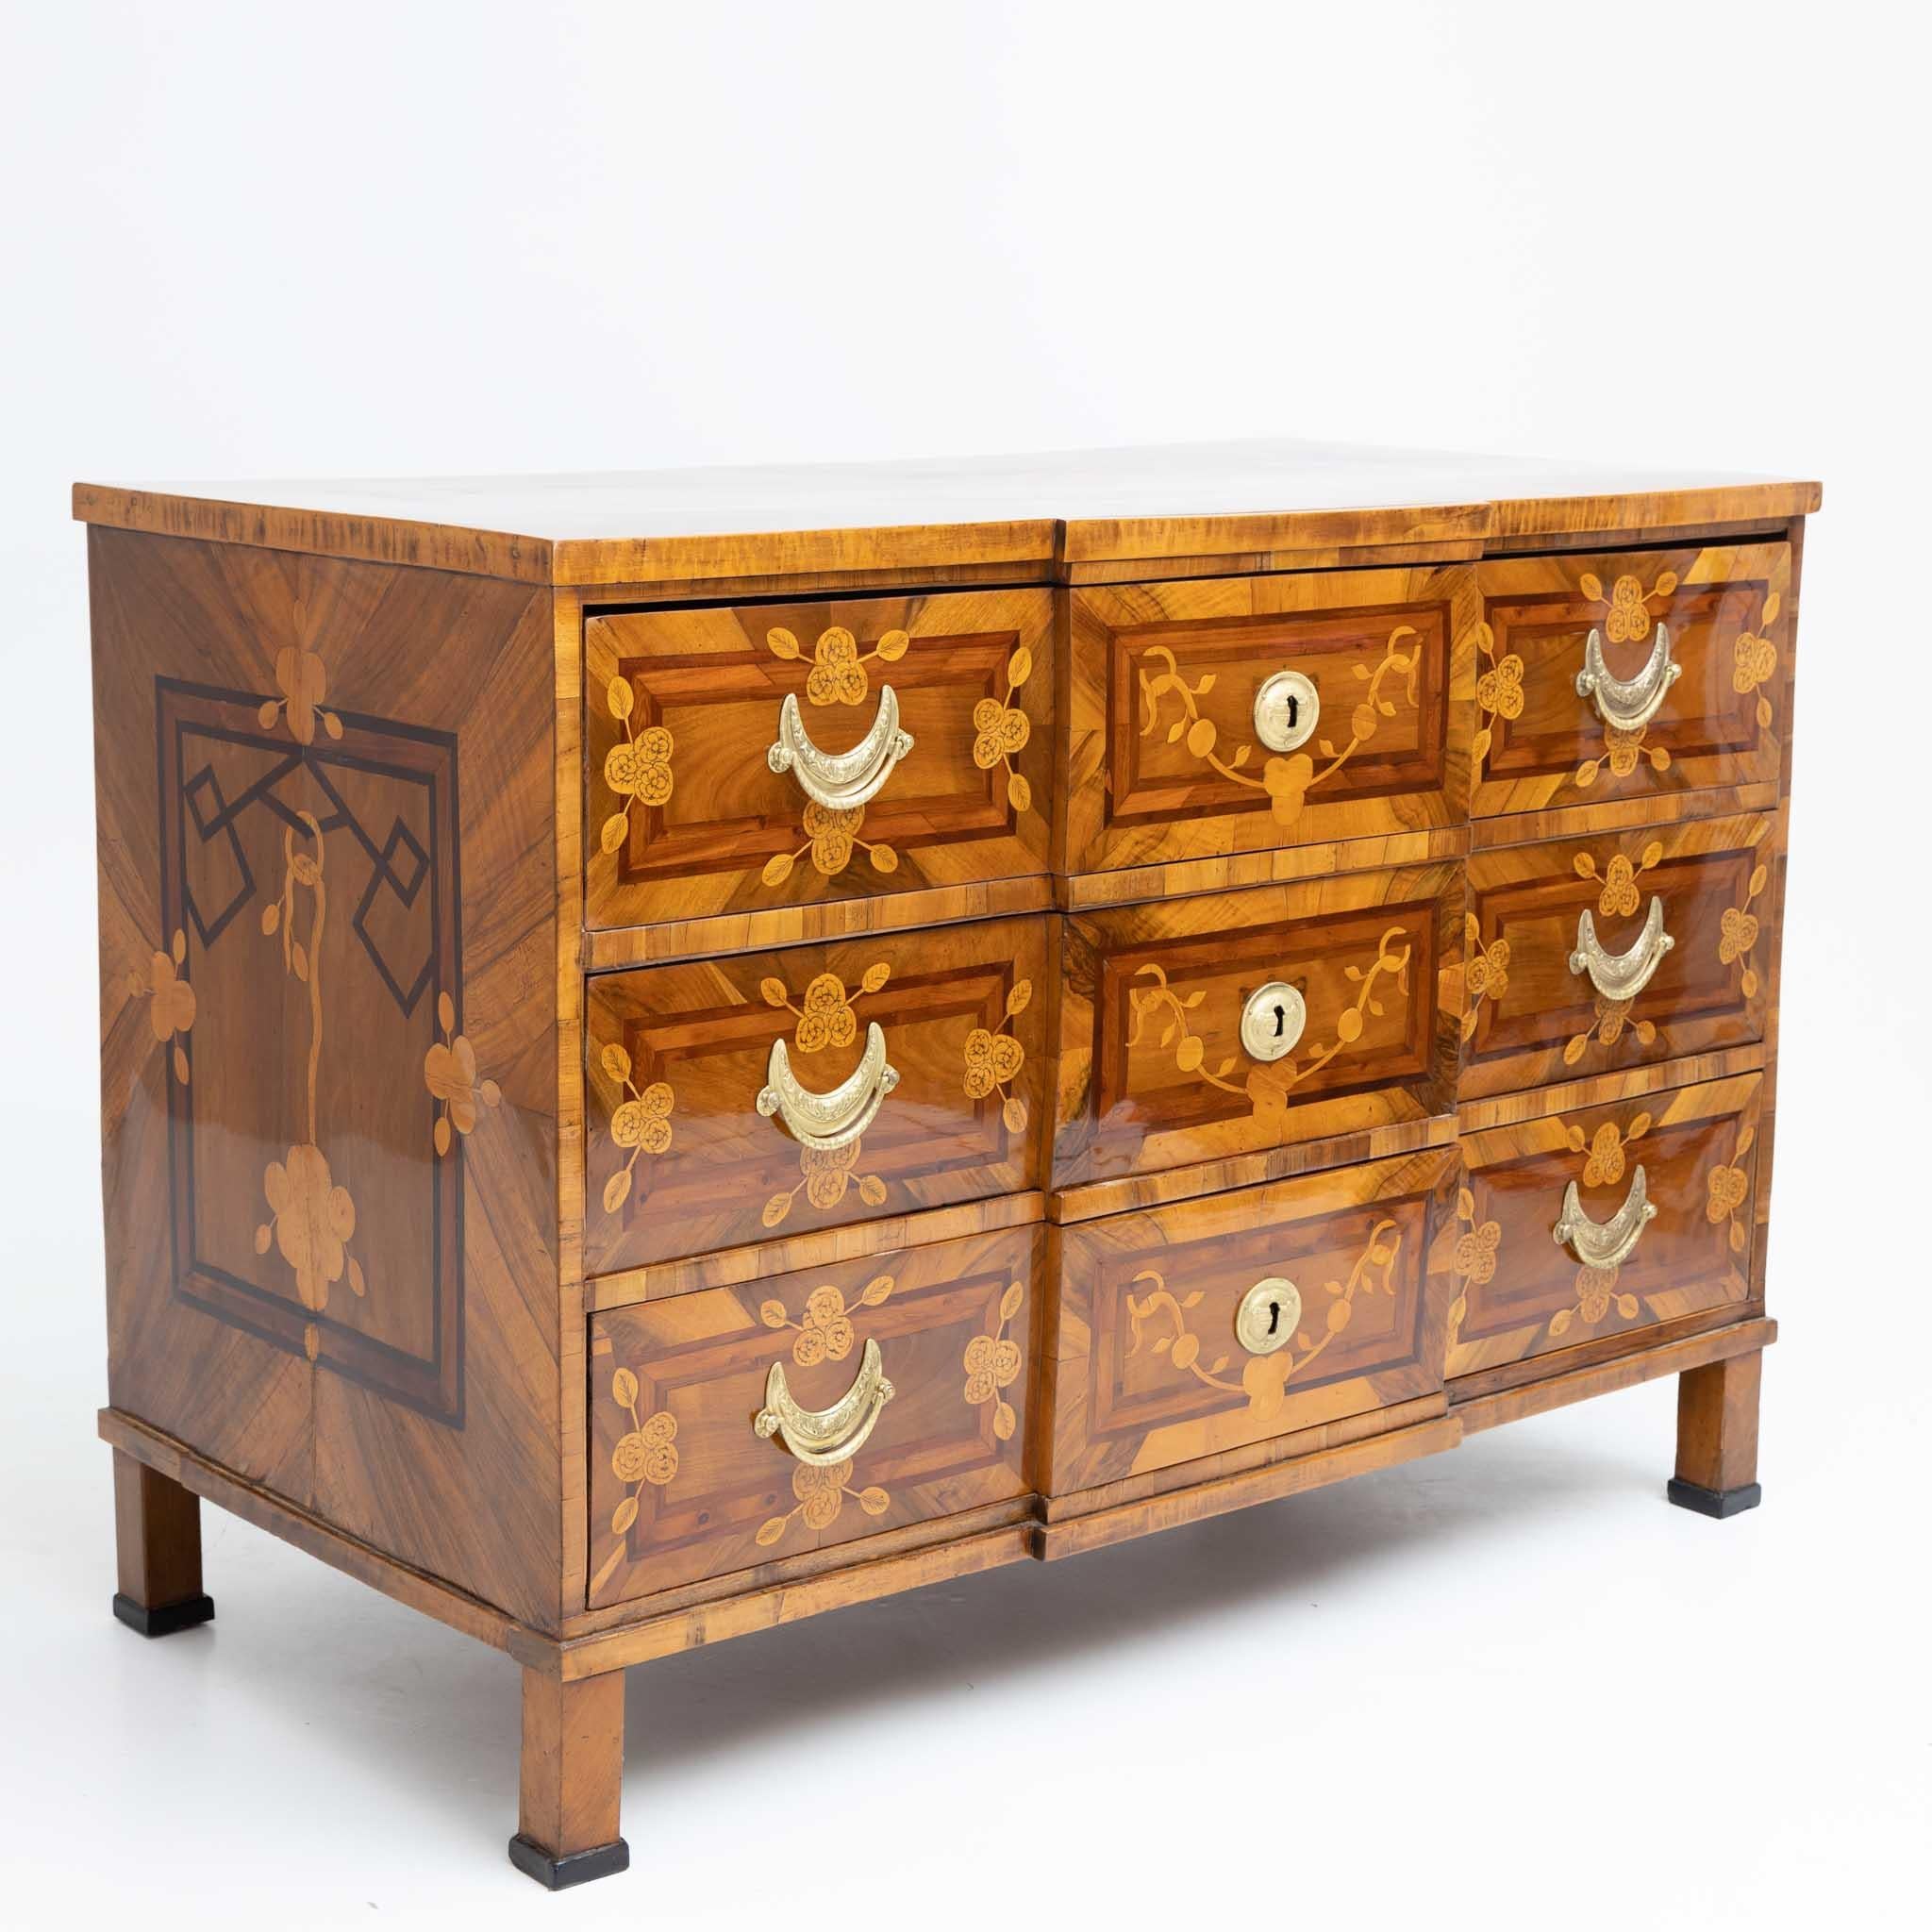 Louis Seize Marquetry Chest of Drawers, Walnut veneered, Late 18th Century For Sale 2